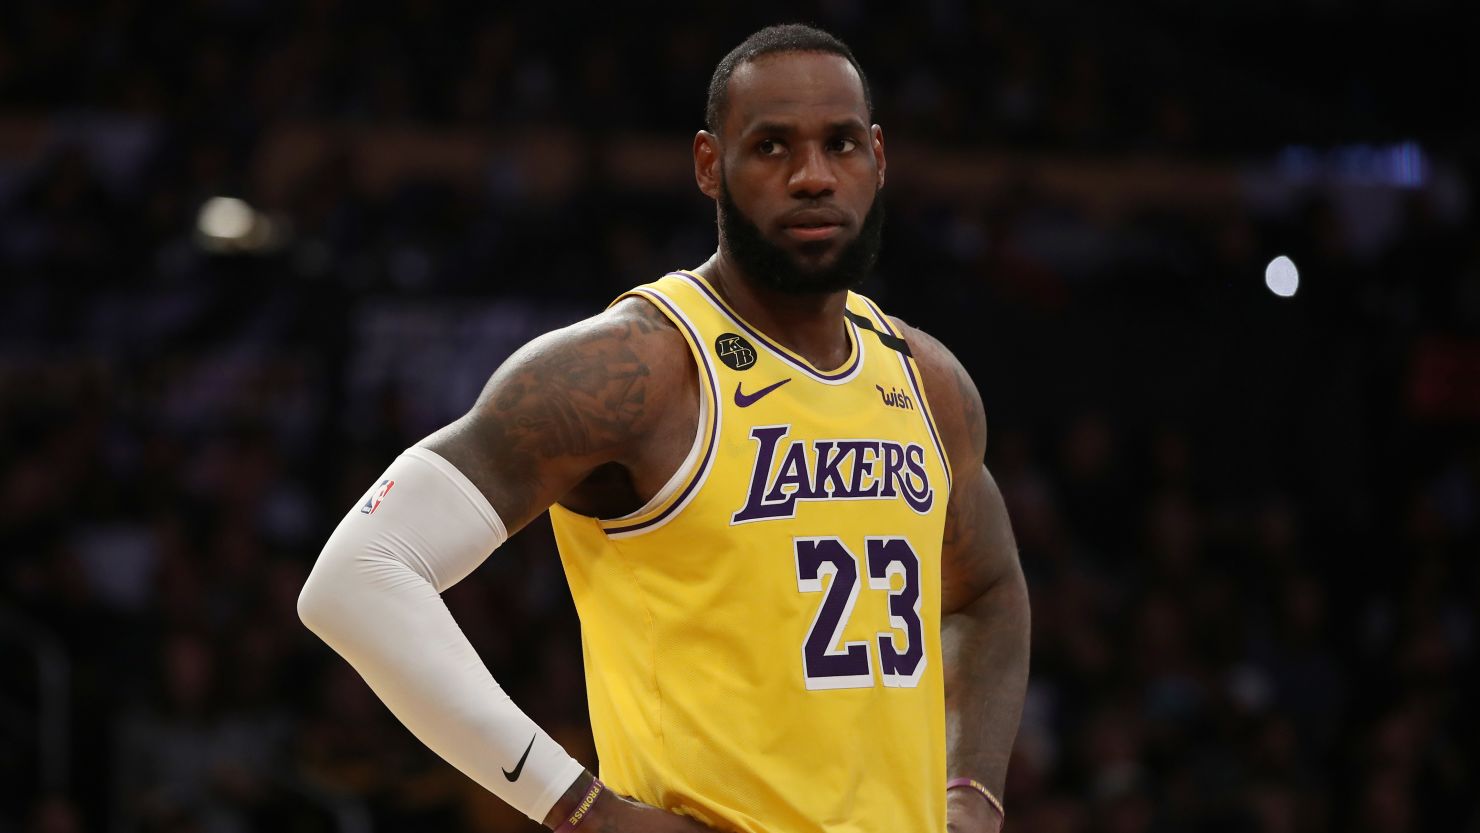 LeBron James voiced his outrage over police brutality and racial injustice in George Floyd's death.